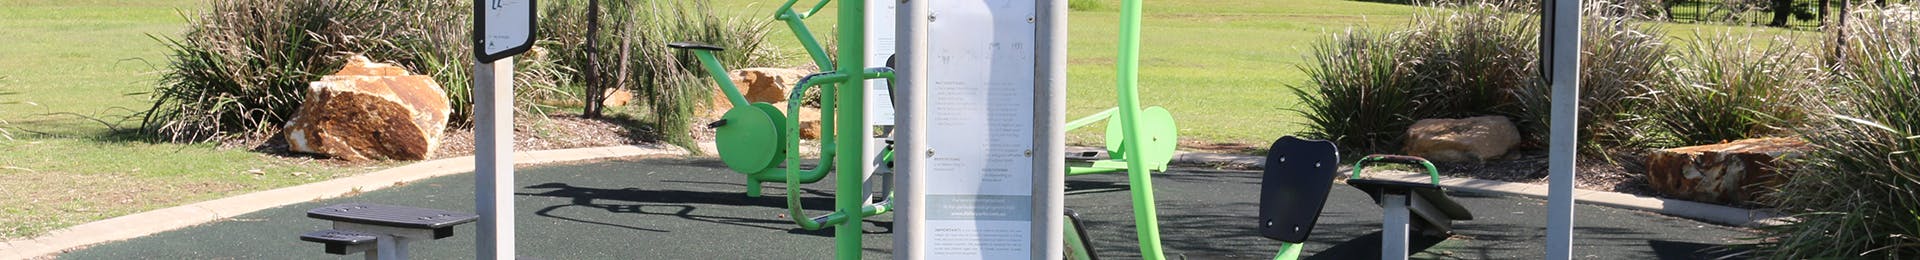 outdoor gym equipment installed at a park